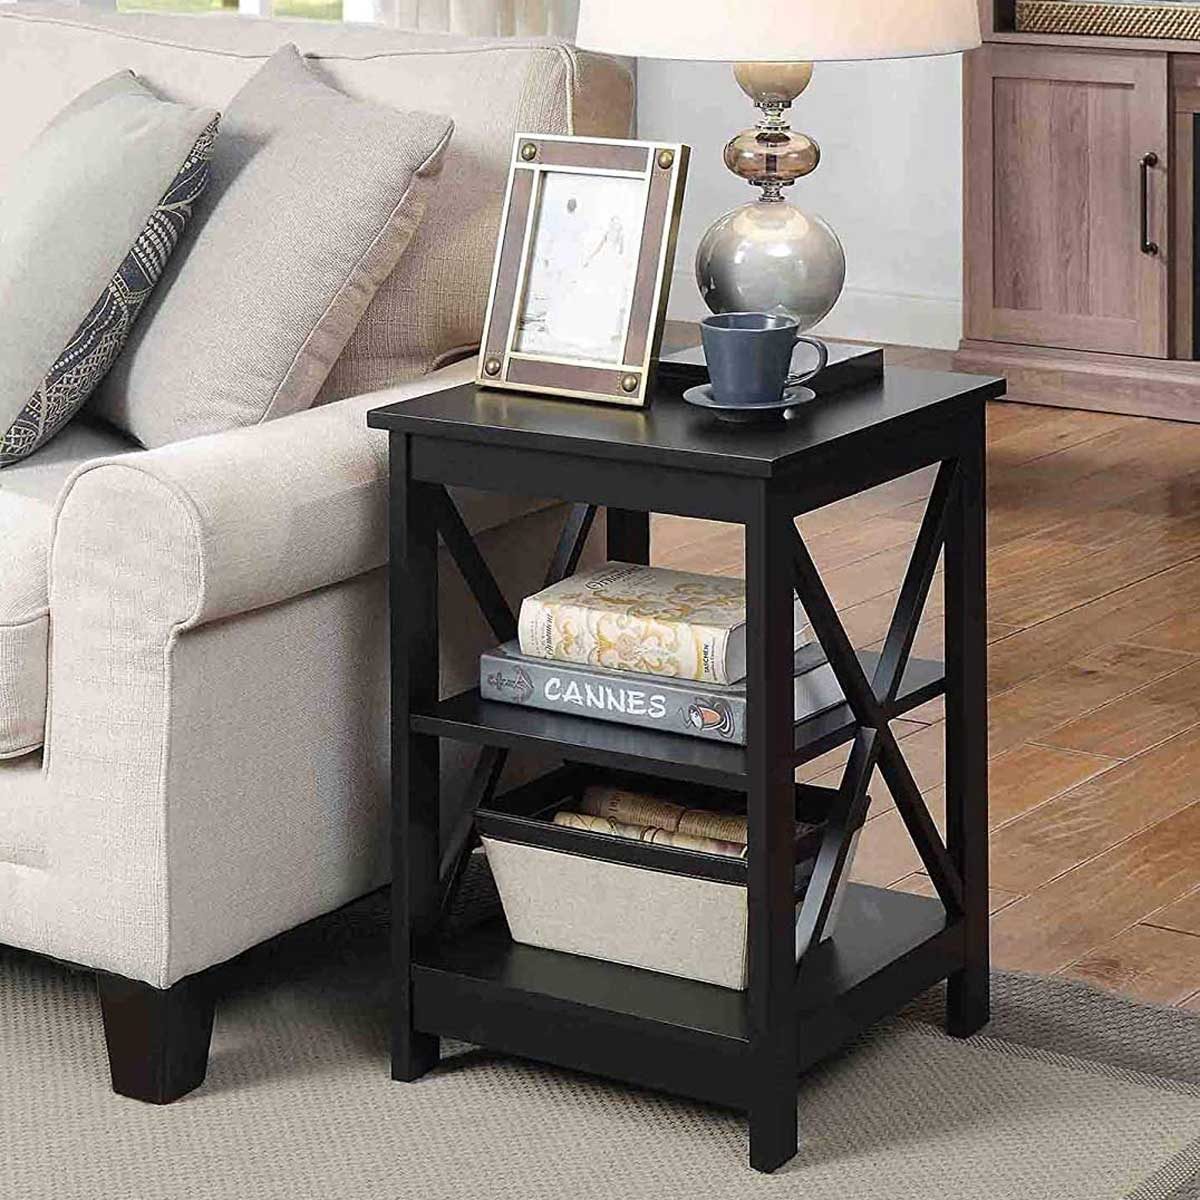 10 Best End Tables for the Living Room | The Family Handyman